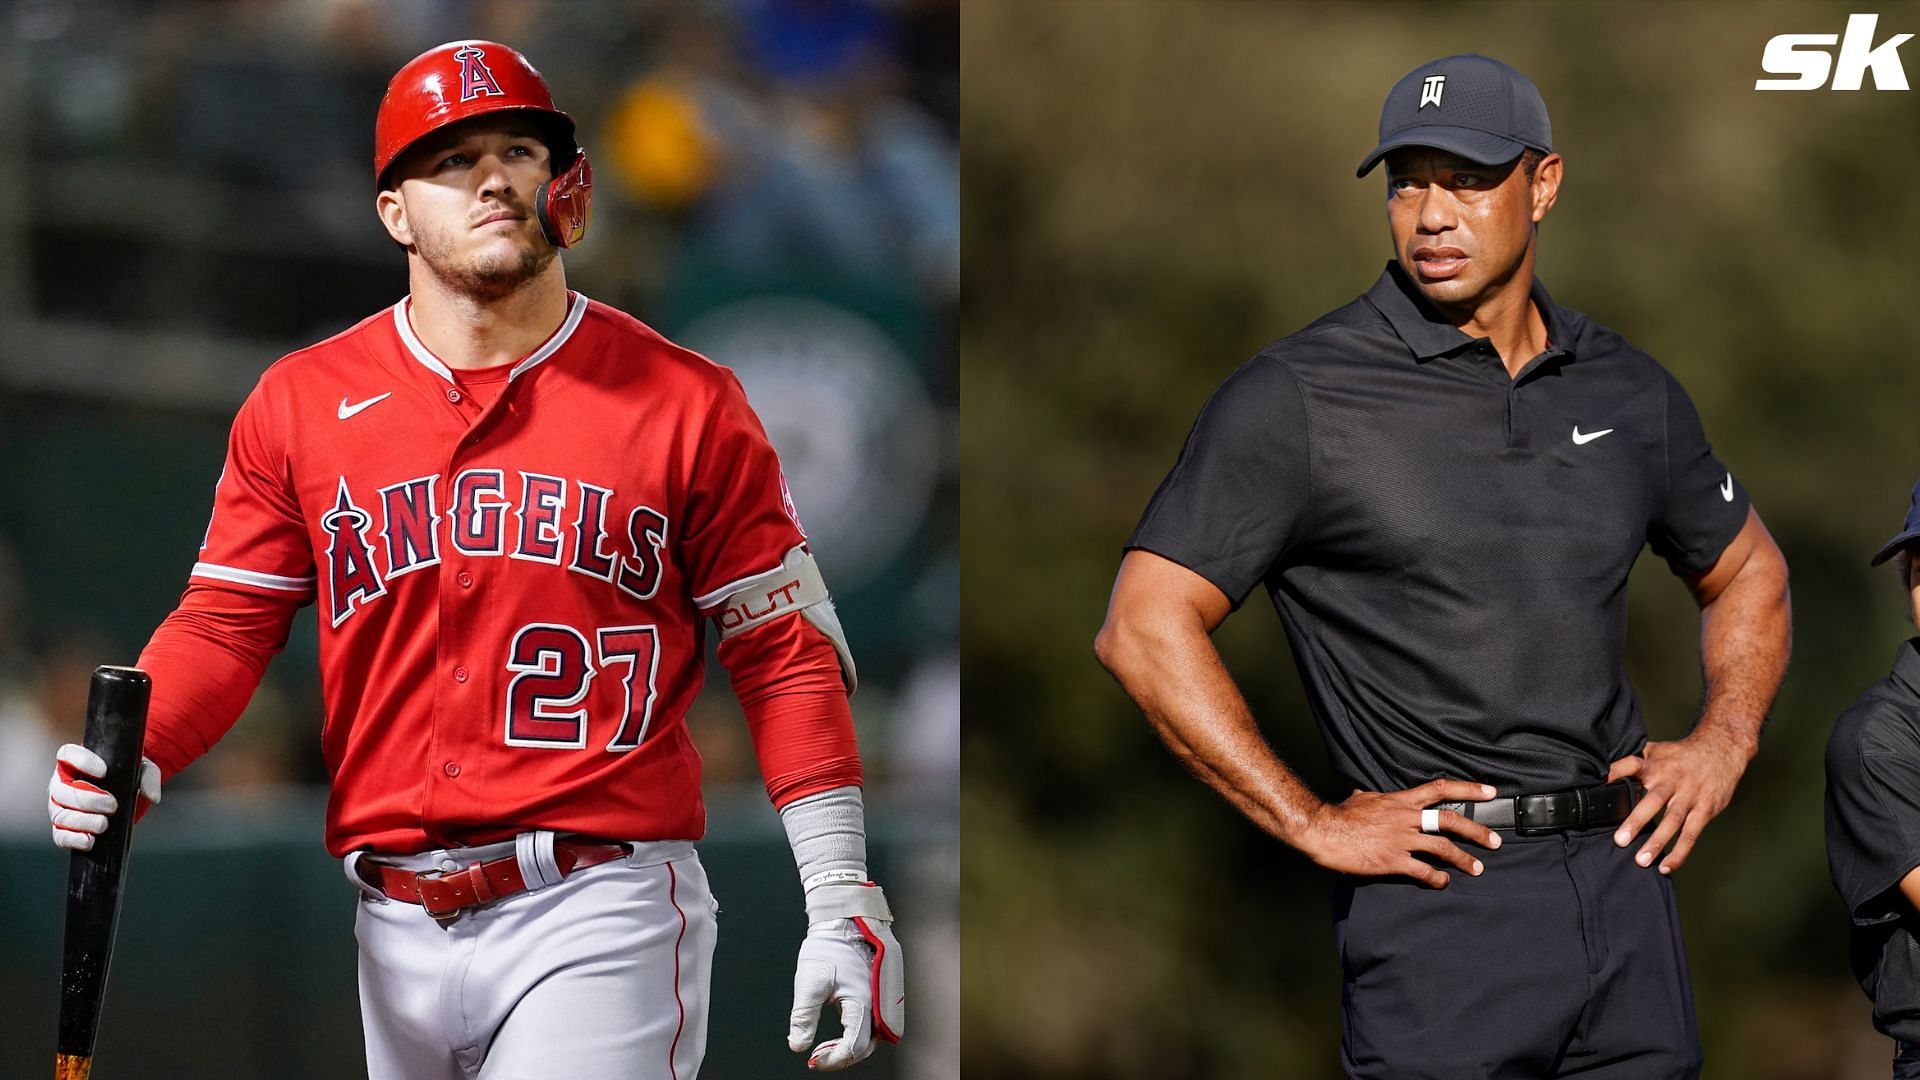 Mike Trout, Tiger Woods plan 18-hole golf course in Vineland